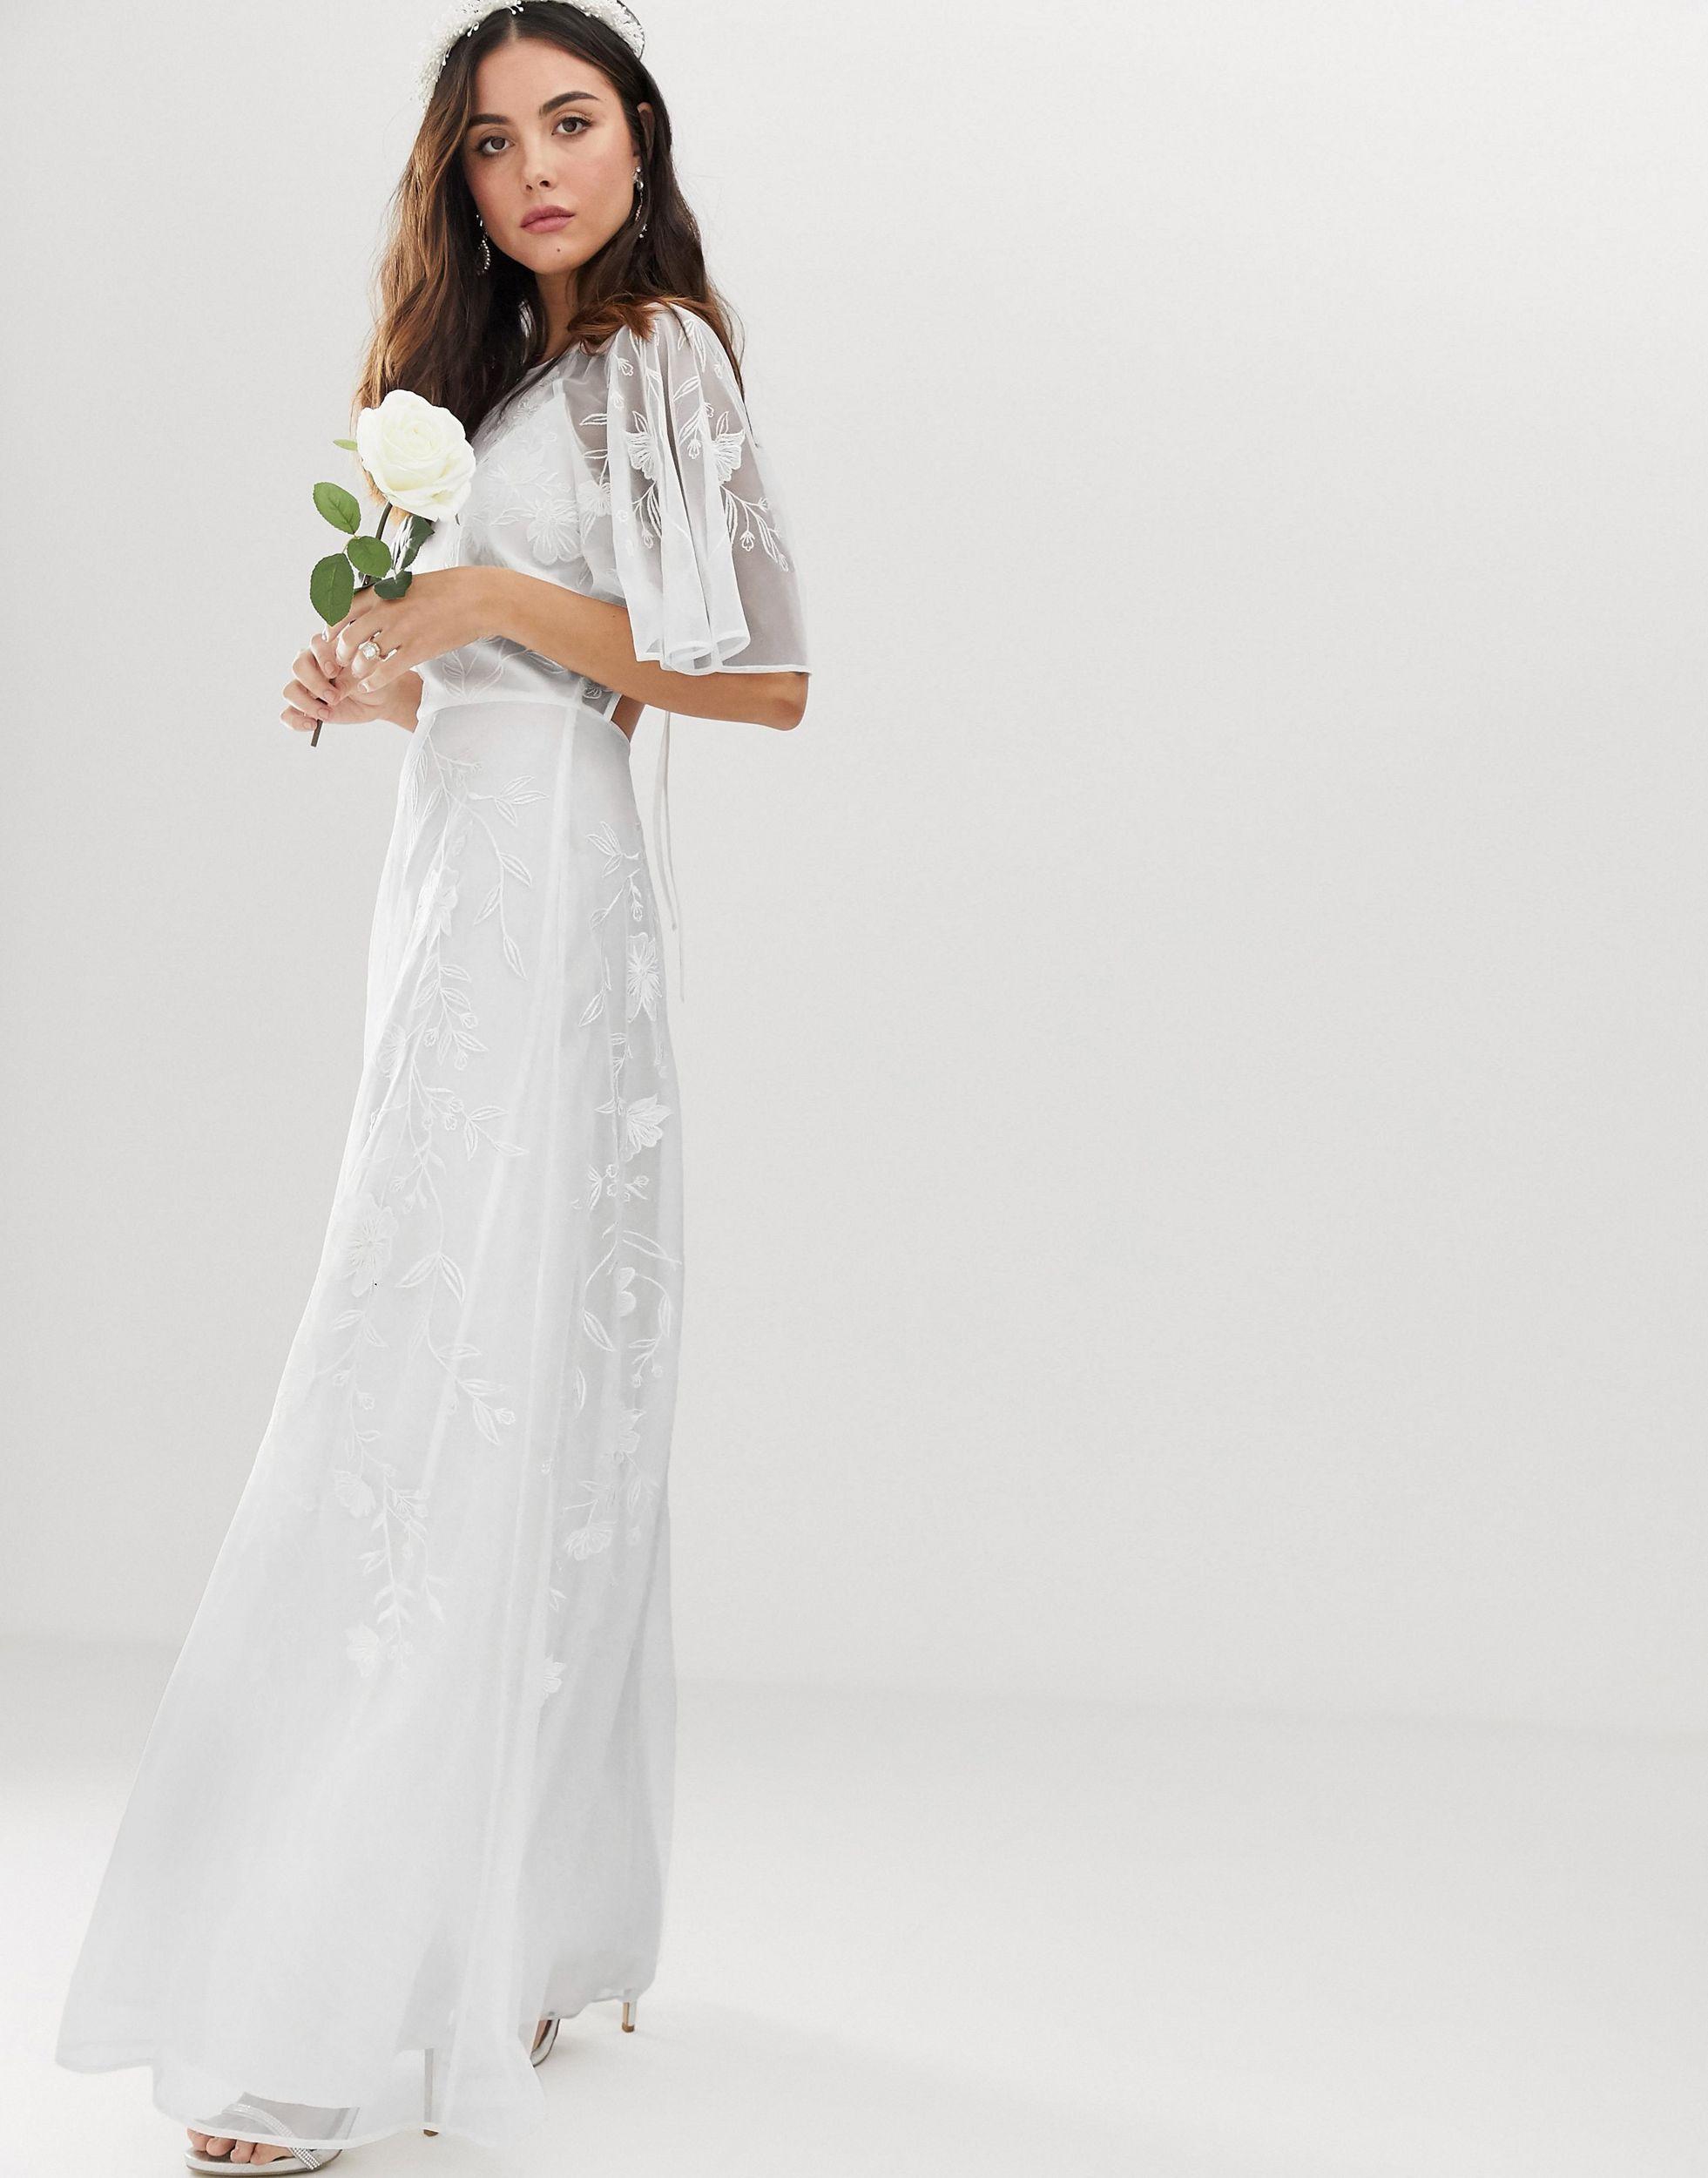 ASOS Synthetic Mia Embroidered Flutter Sleeve Wedding Dress in ...